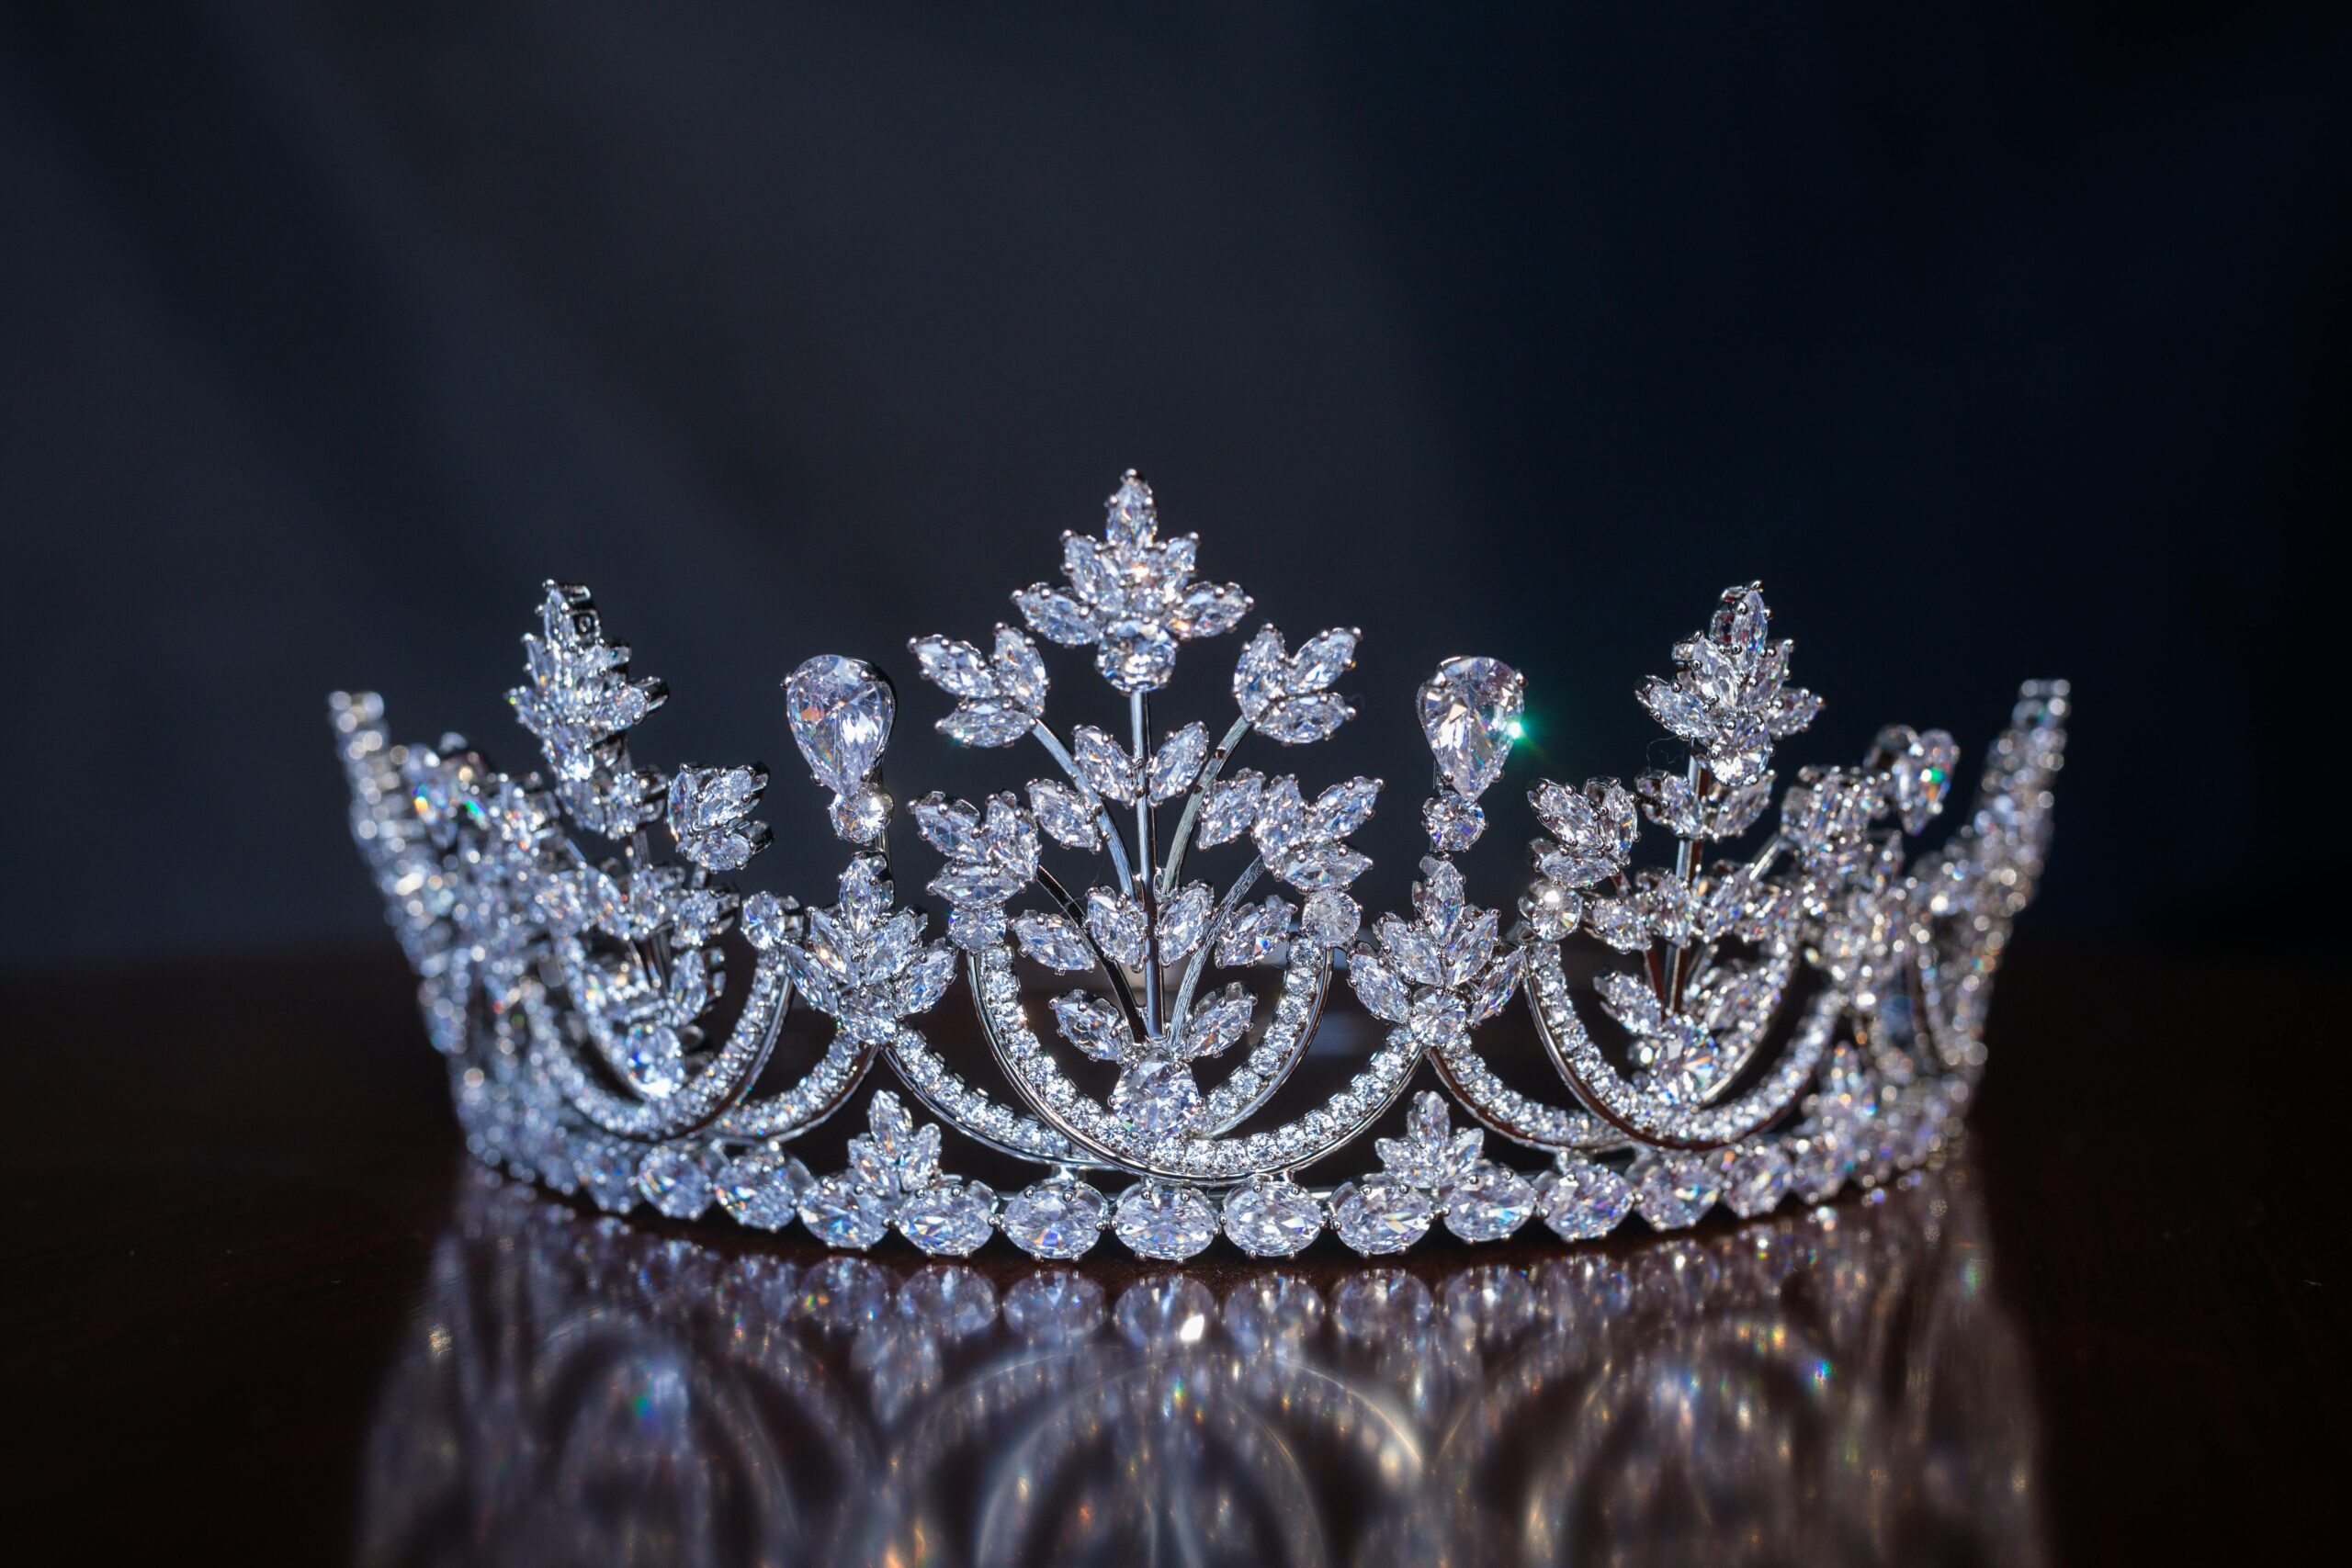 <p>The crown serves as a metaphor for authority, victory, and honor. In Revelation 2:10, believers are promised a “crown of life,” representing the reward for their faithfulness. This symbol signifies the eternal victory and honor bestowed upon those who persevere in their faith.</p>